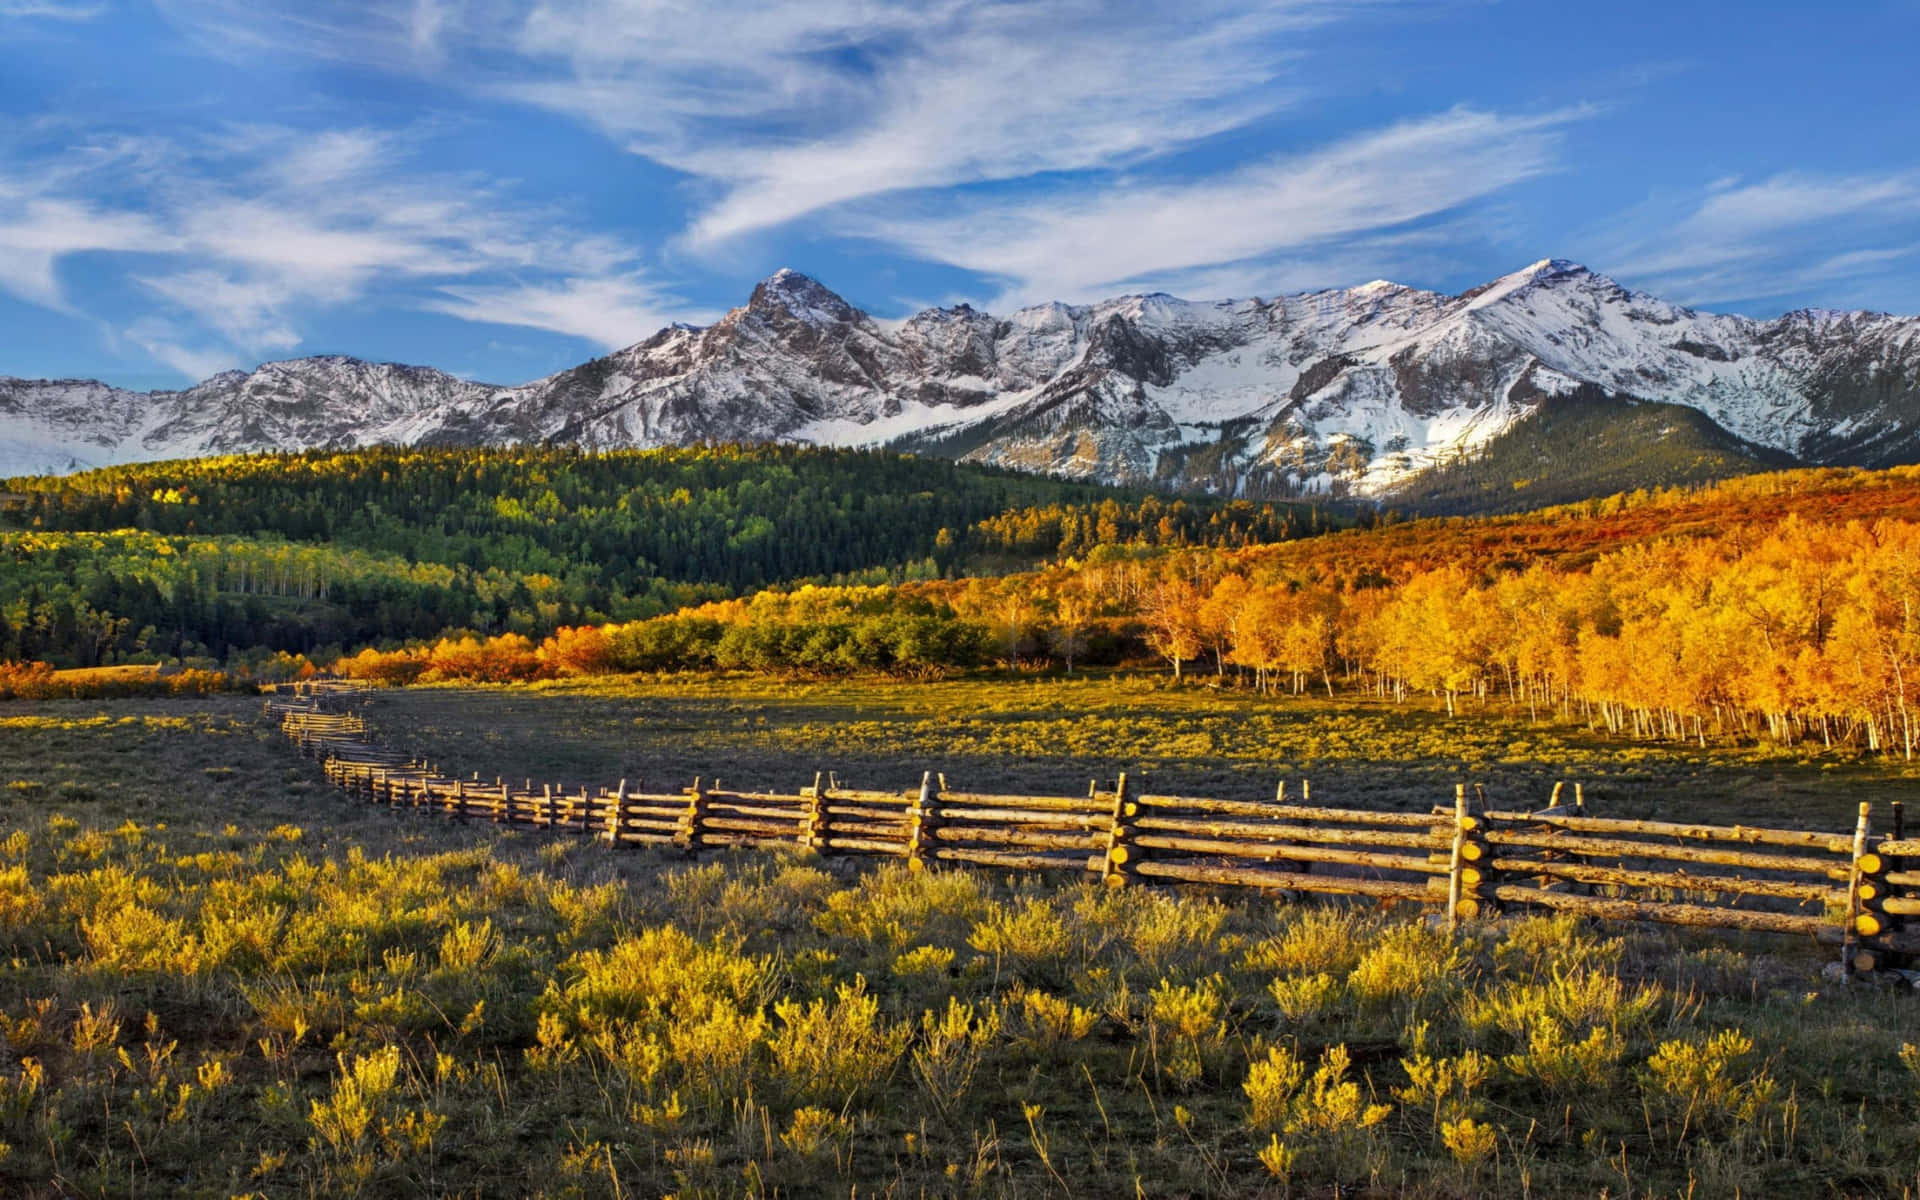 "The Splendor of Fall in the Mountains" Wallpaper